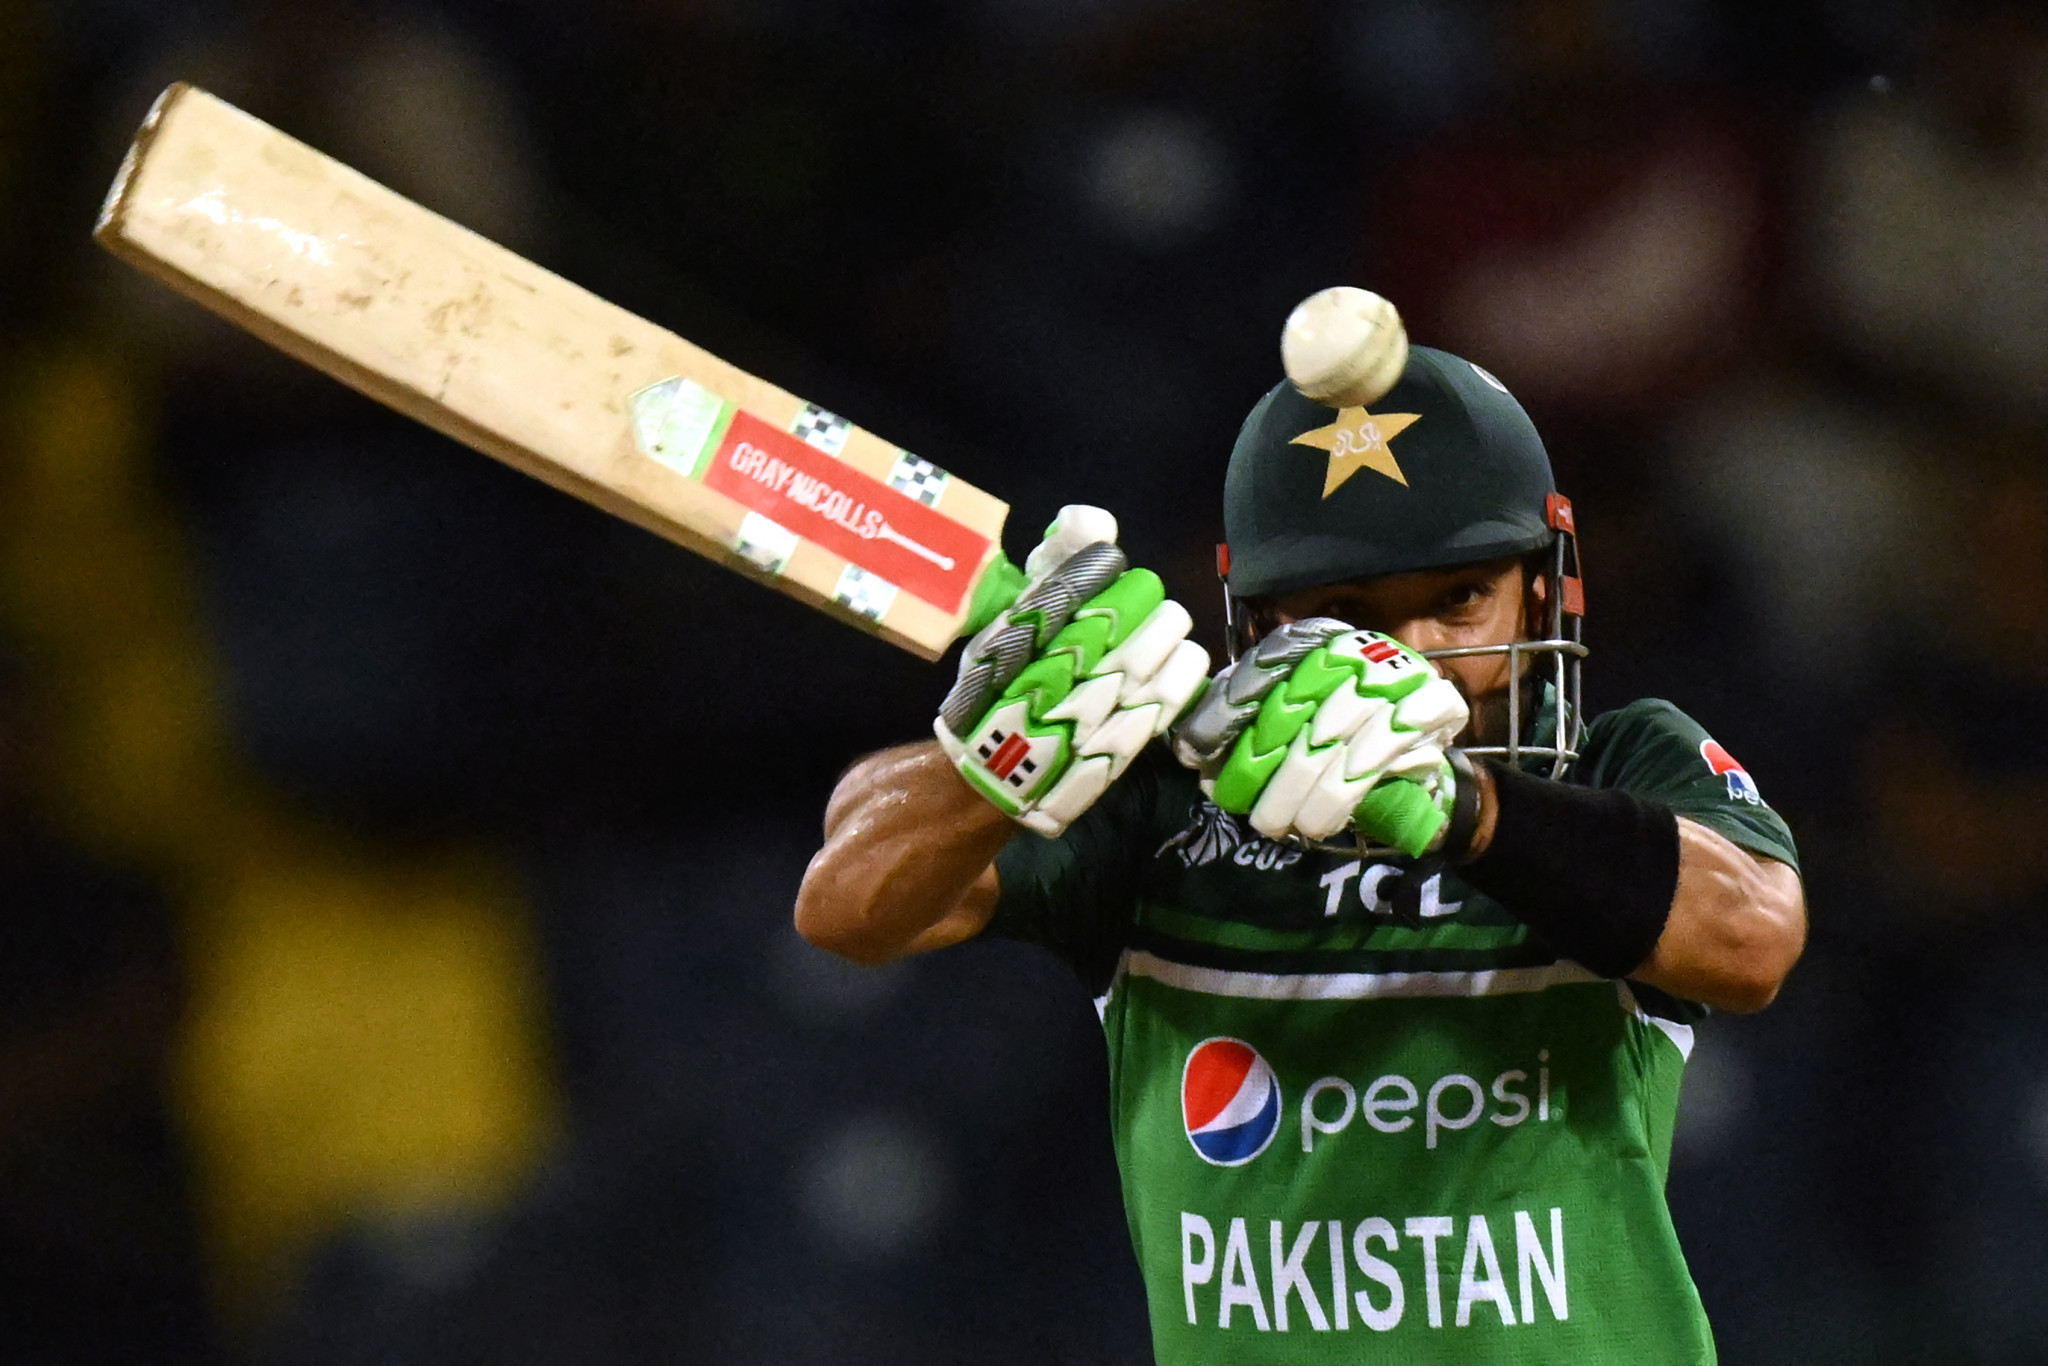 Pakistan wicketkeeper Muhammad Rizwan hit an unbeaten 131 to guide his country to the highest ever successful Cricket World Cup run chase ©Getty Images